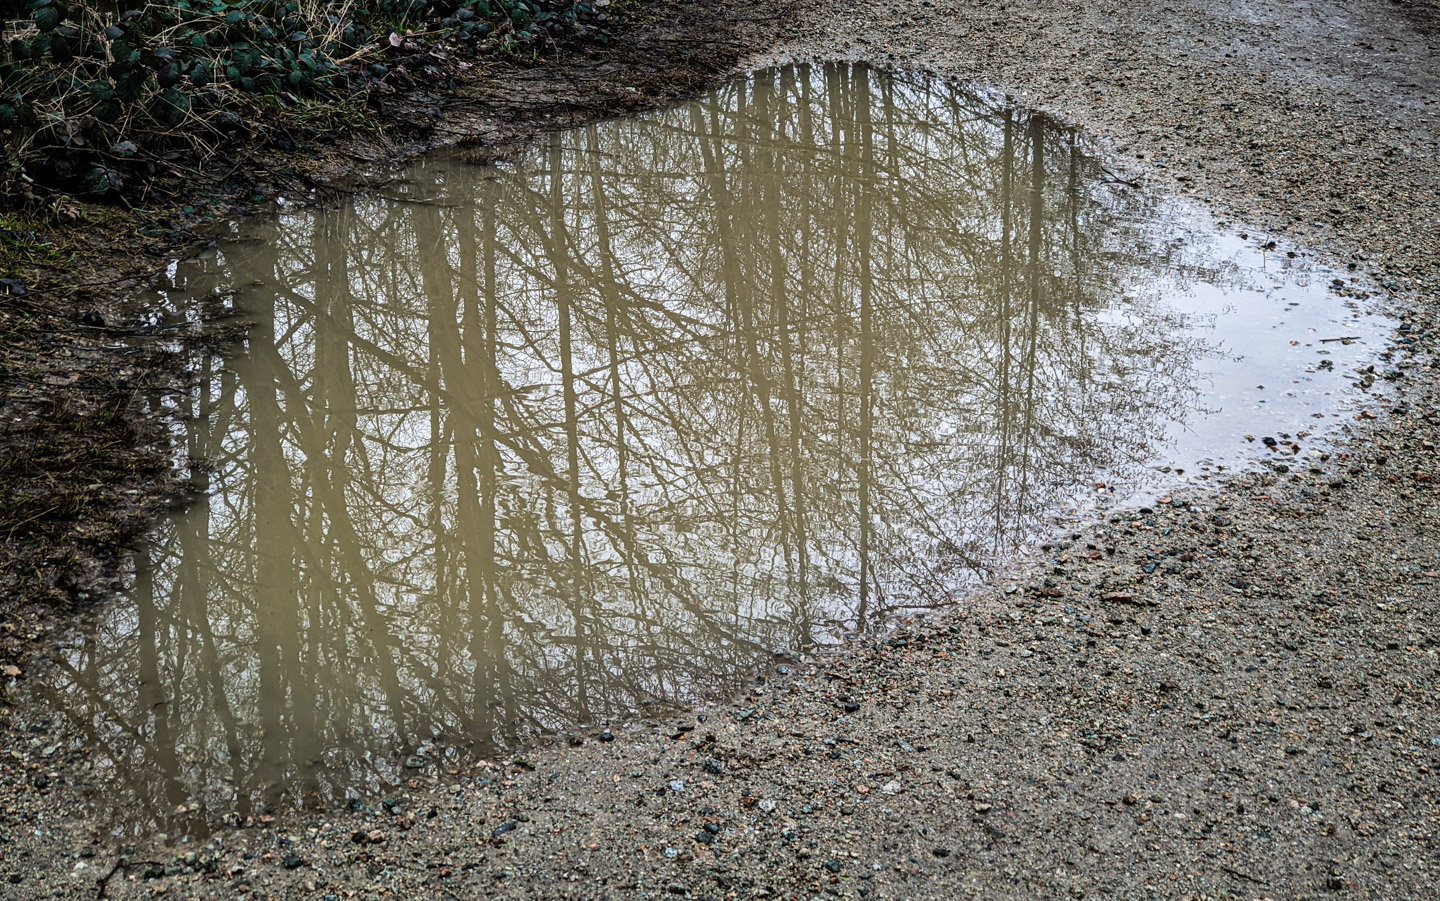 Reflecting puddle in McDonald Park on Sea Island, Vancouver